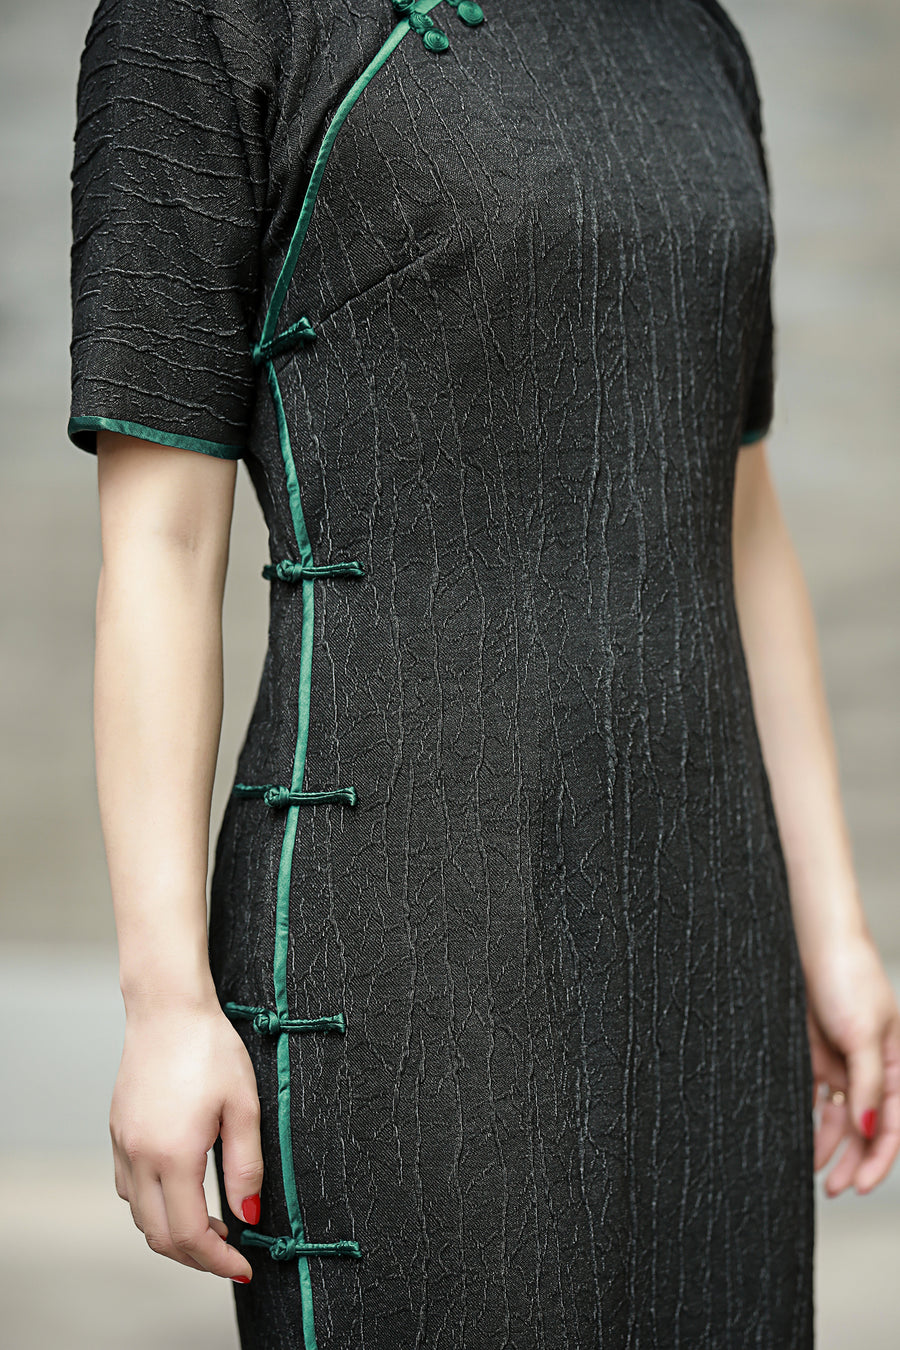 The Touch of Teal Qipao - Textured Charcoal